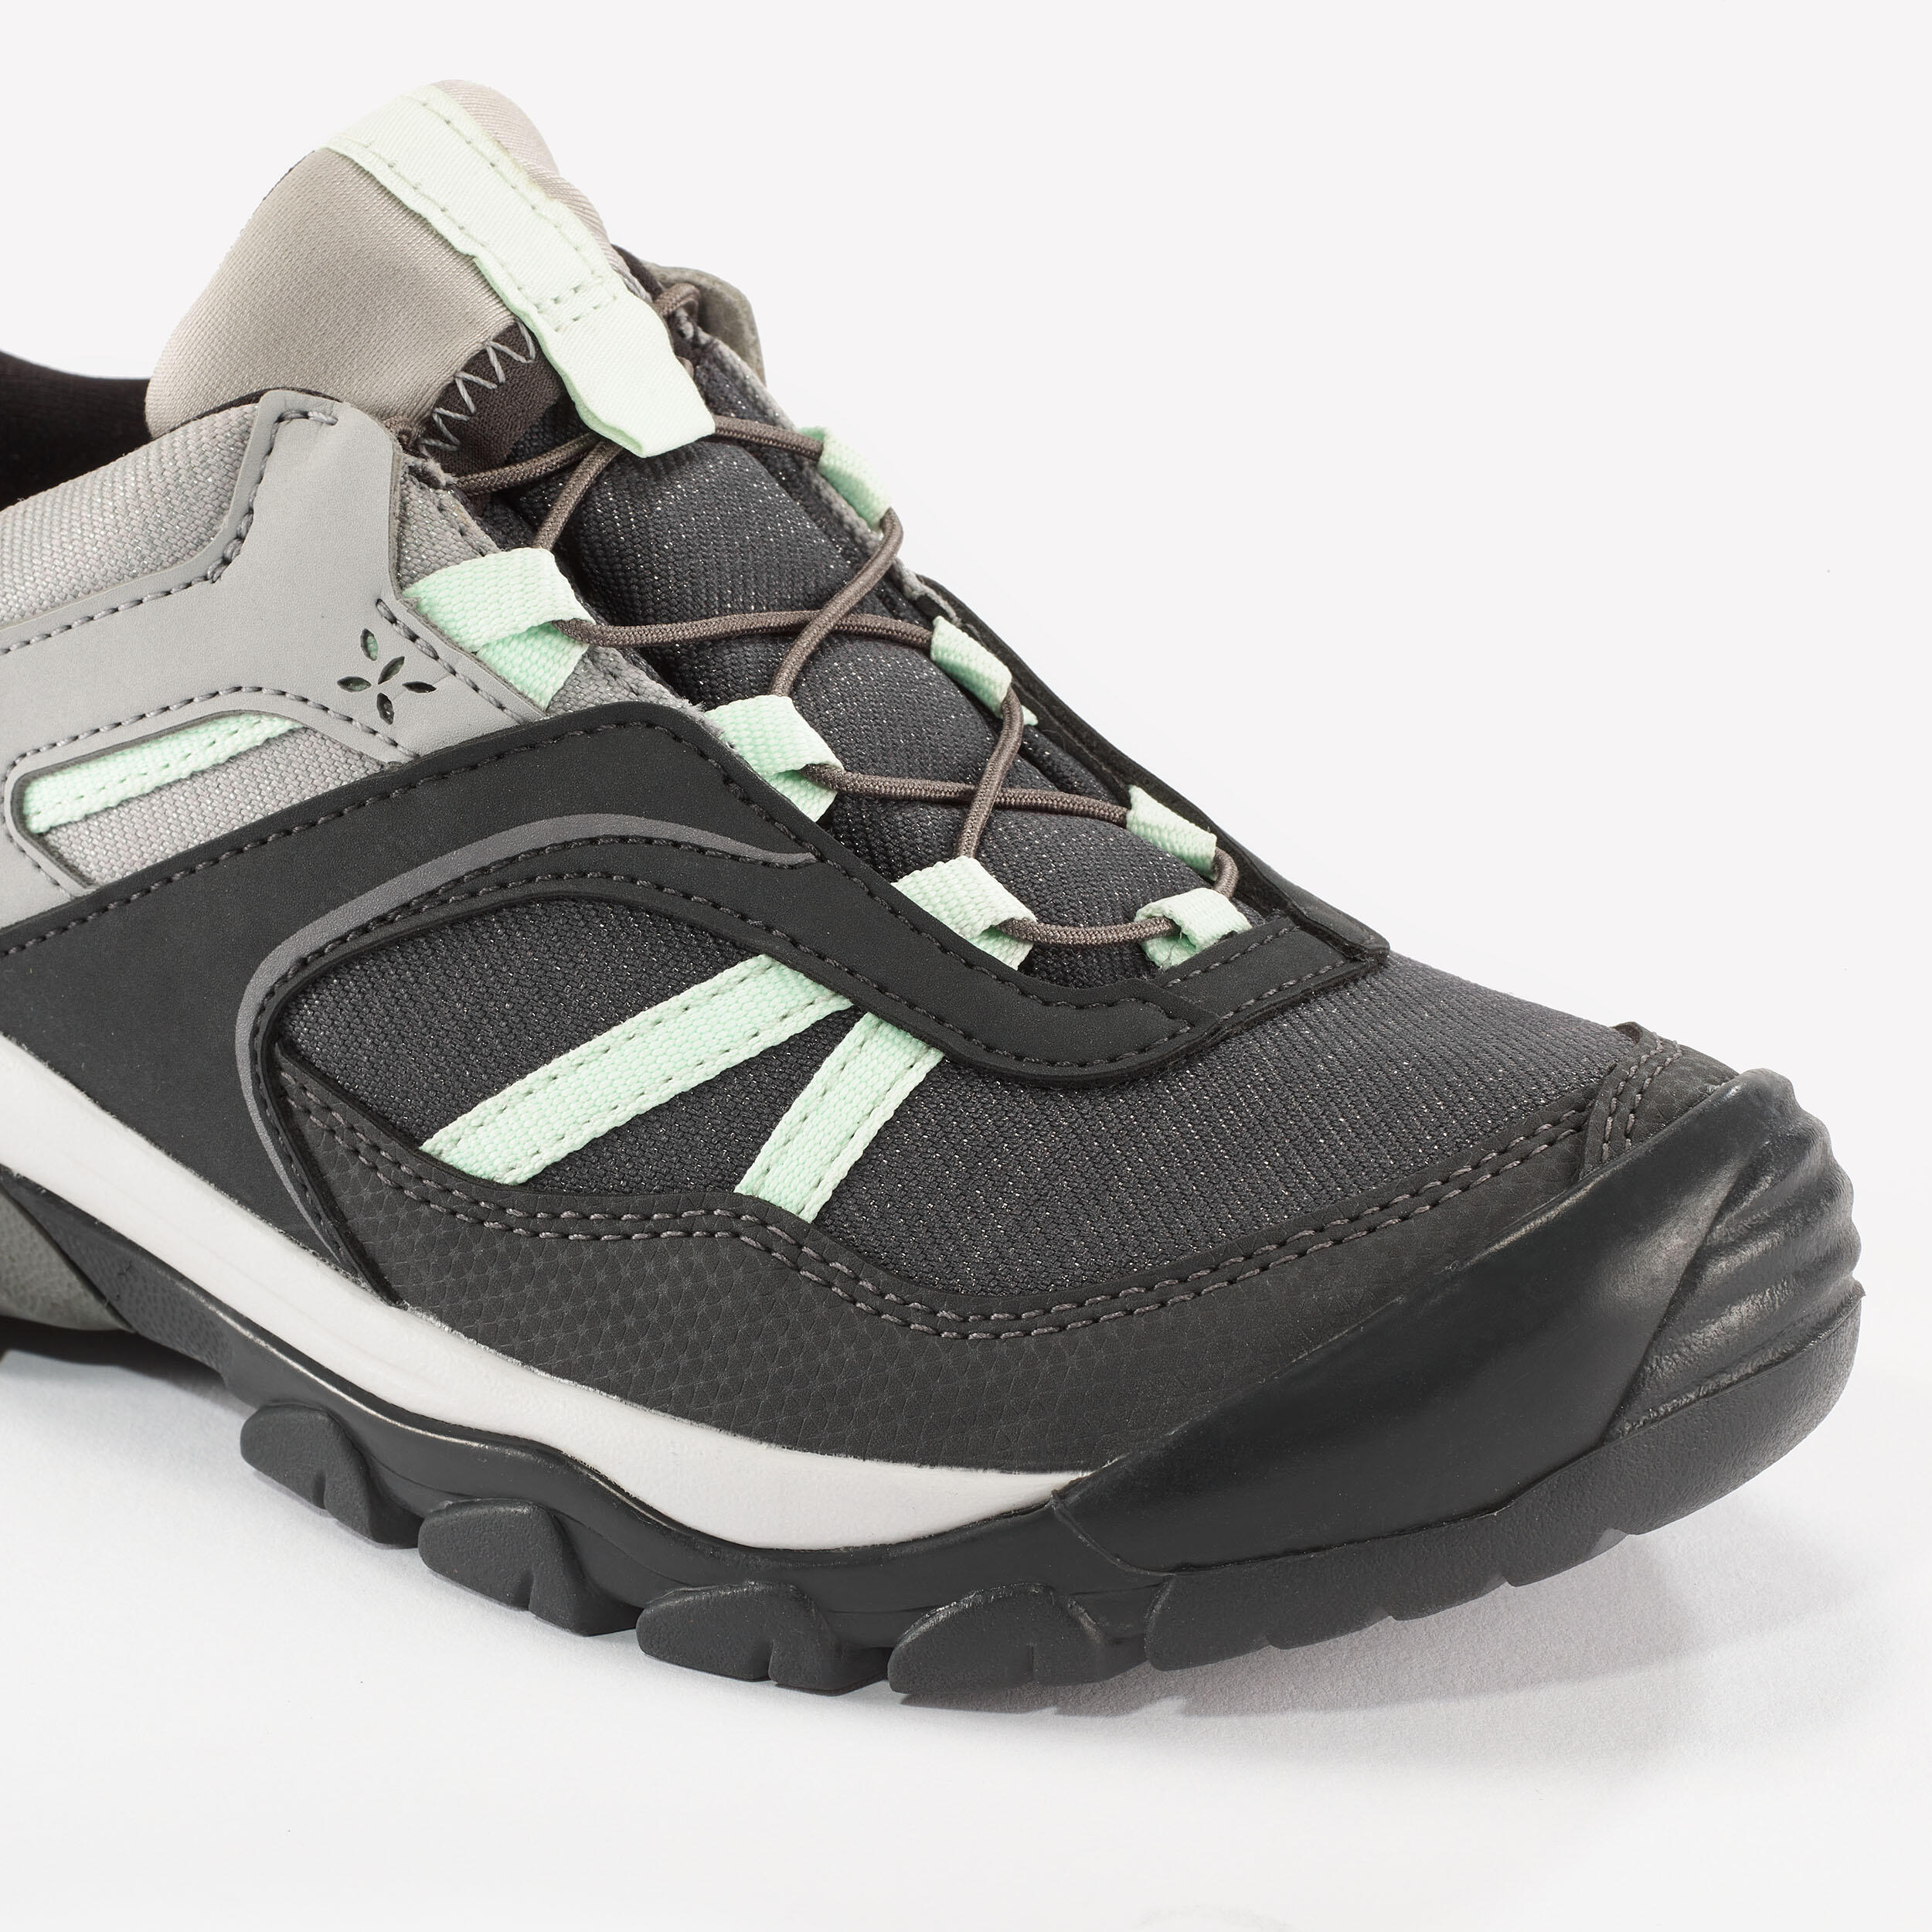 Children's waterproof lace-up hiking shoes - CROSSROCK grey - 35–38 9/10